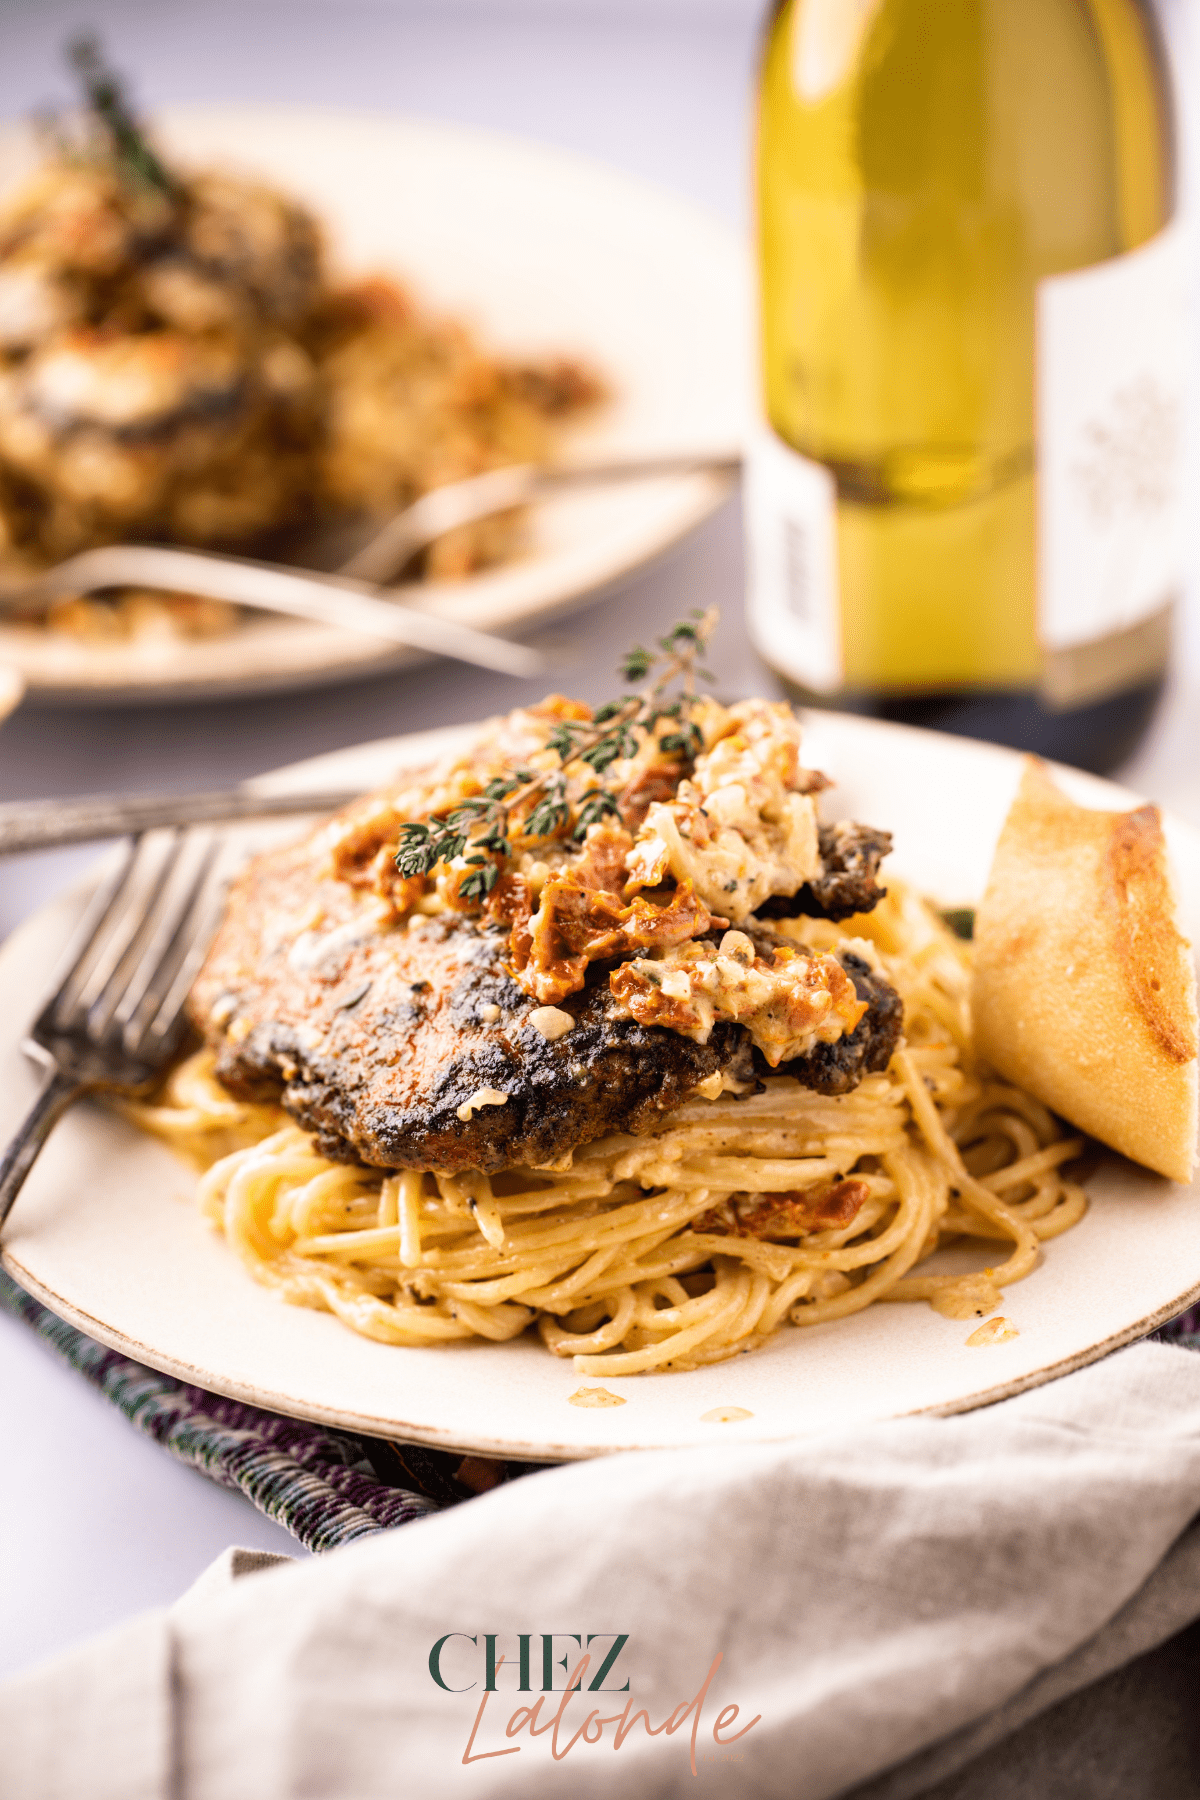 Sun-Dried tomato pasta with pan-seared chicken breast on a white plate. There a a bottle of white wine, vintage silverware, and bread